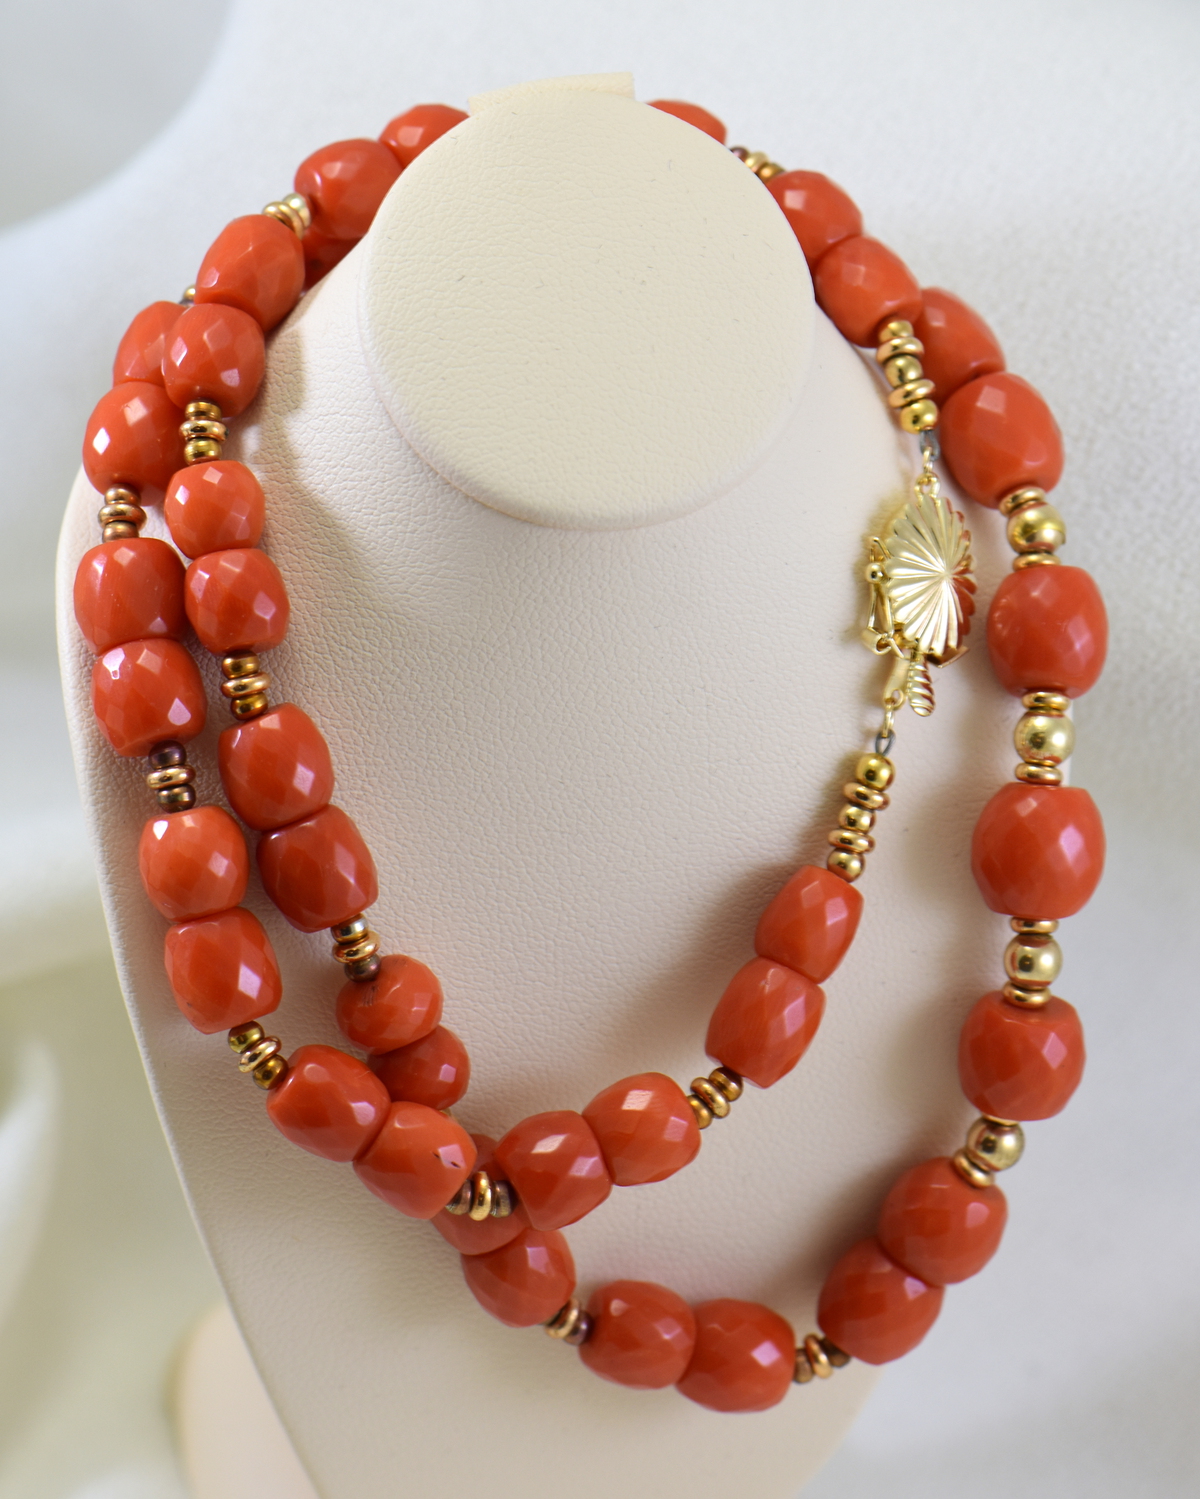 https://www.fwcj.com/wp-content/uploads/2022/02/mid_century_red_coral_and_gold_beaded_necklace_and_earring_set_4.JPG.jpg